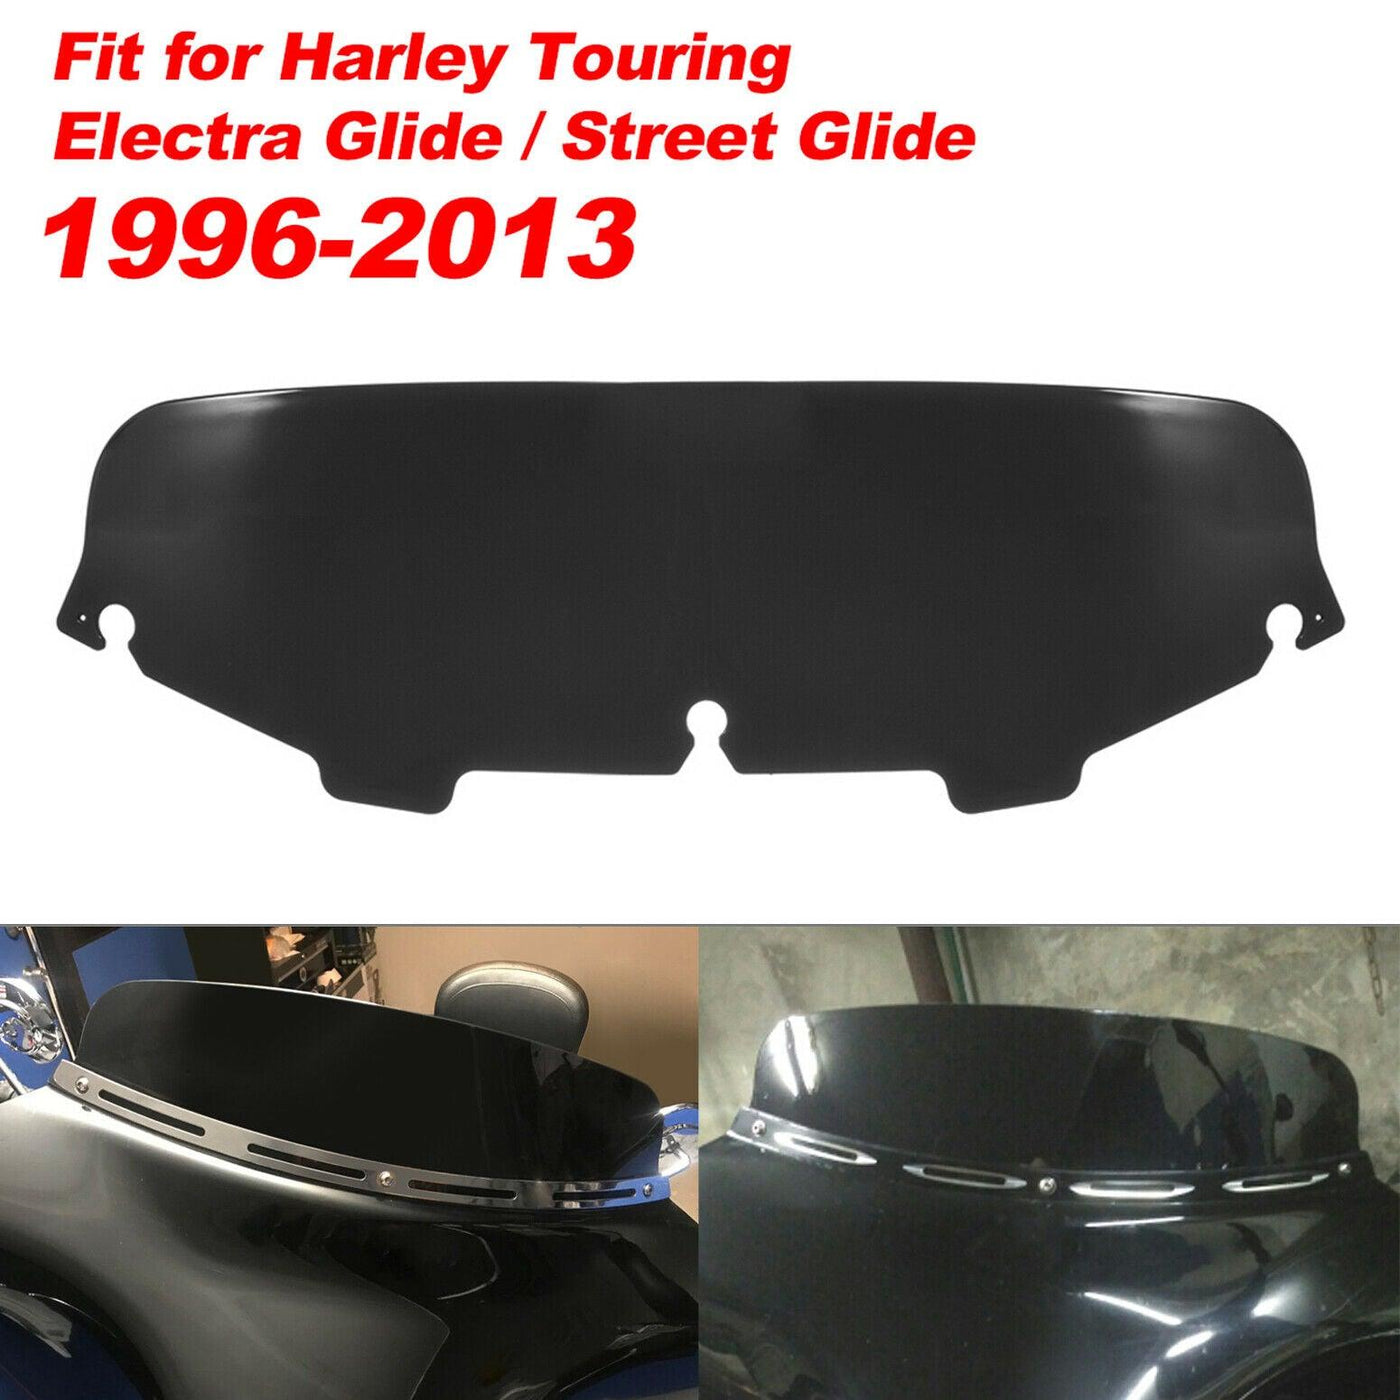 5" Round Square Windshield Windscreen Fit for Harley Touring Street Glide 96-13 - Moto Life Products